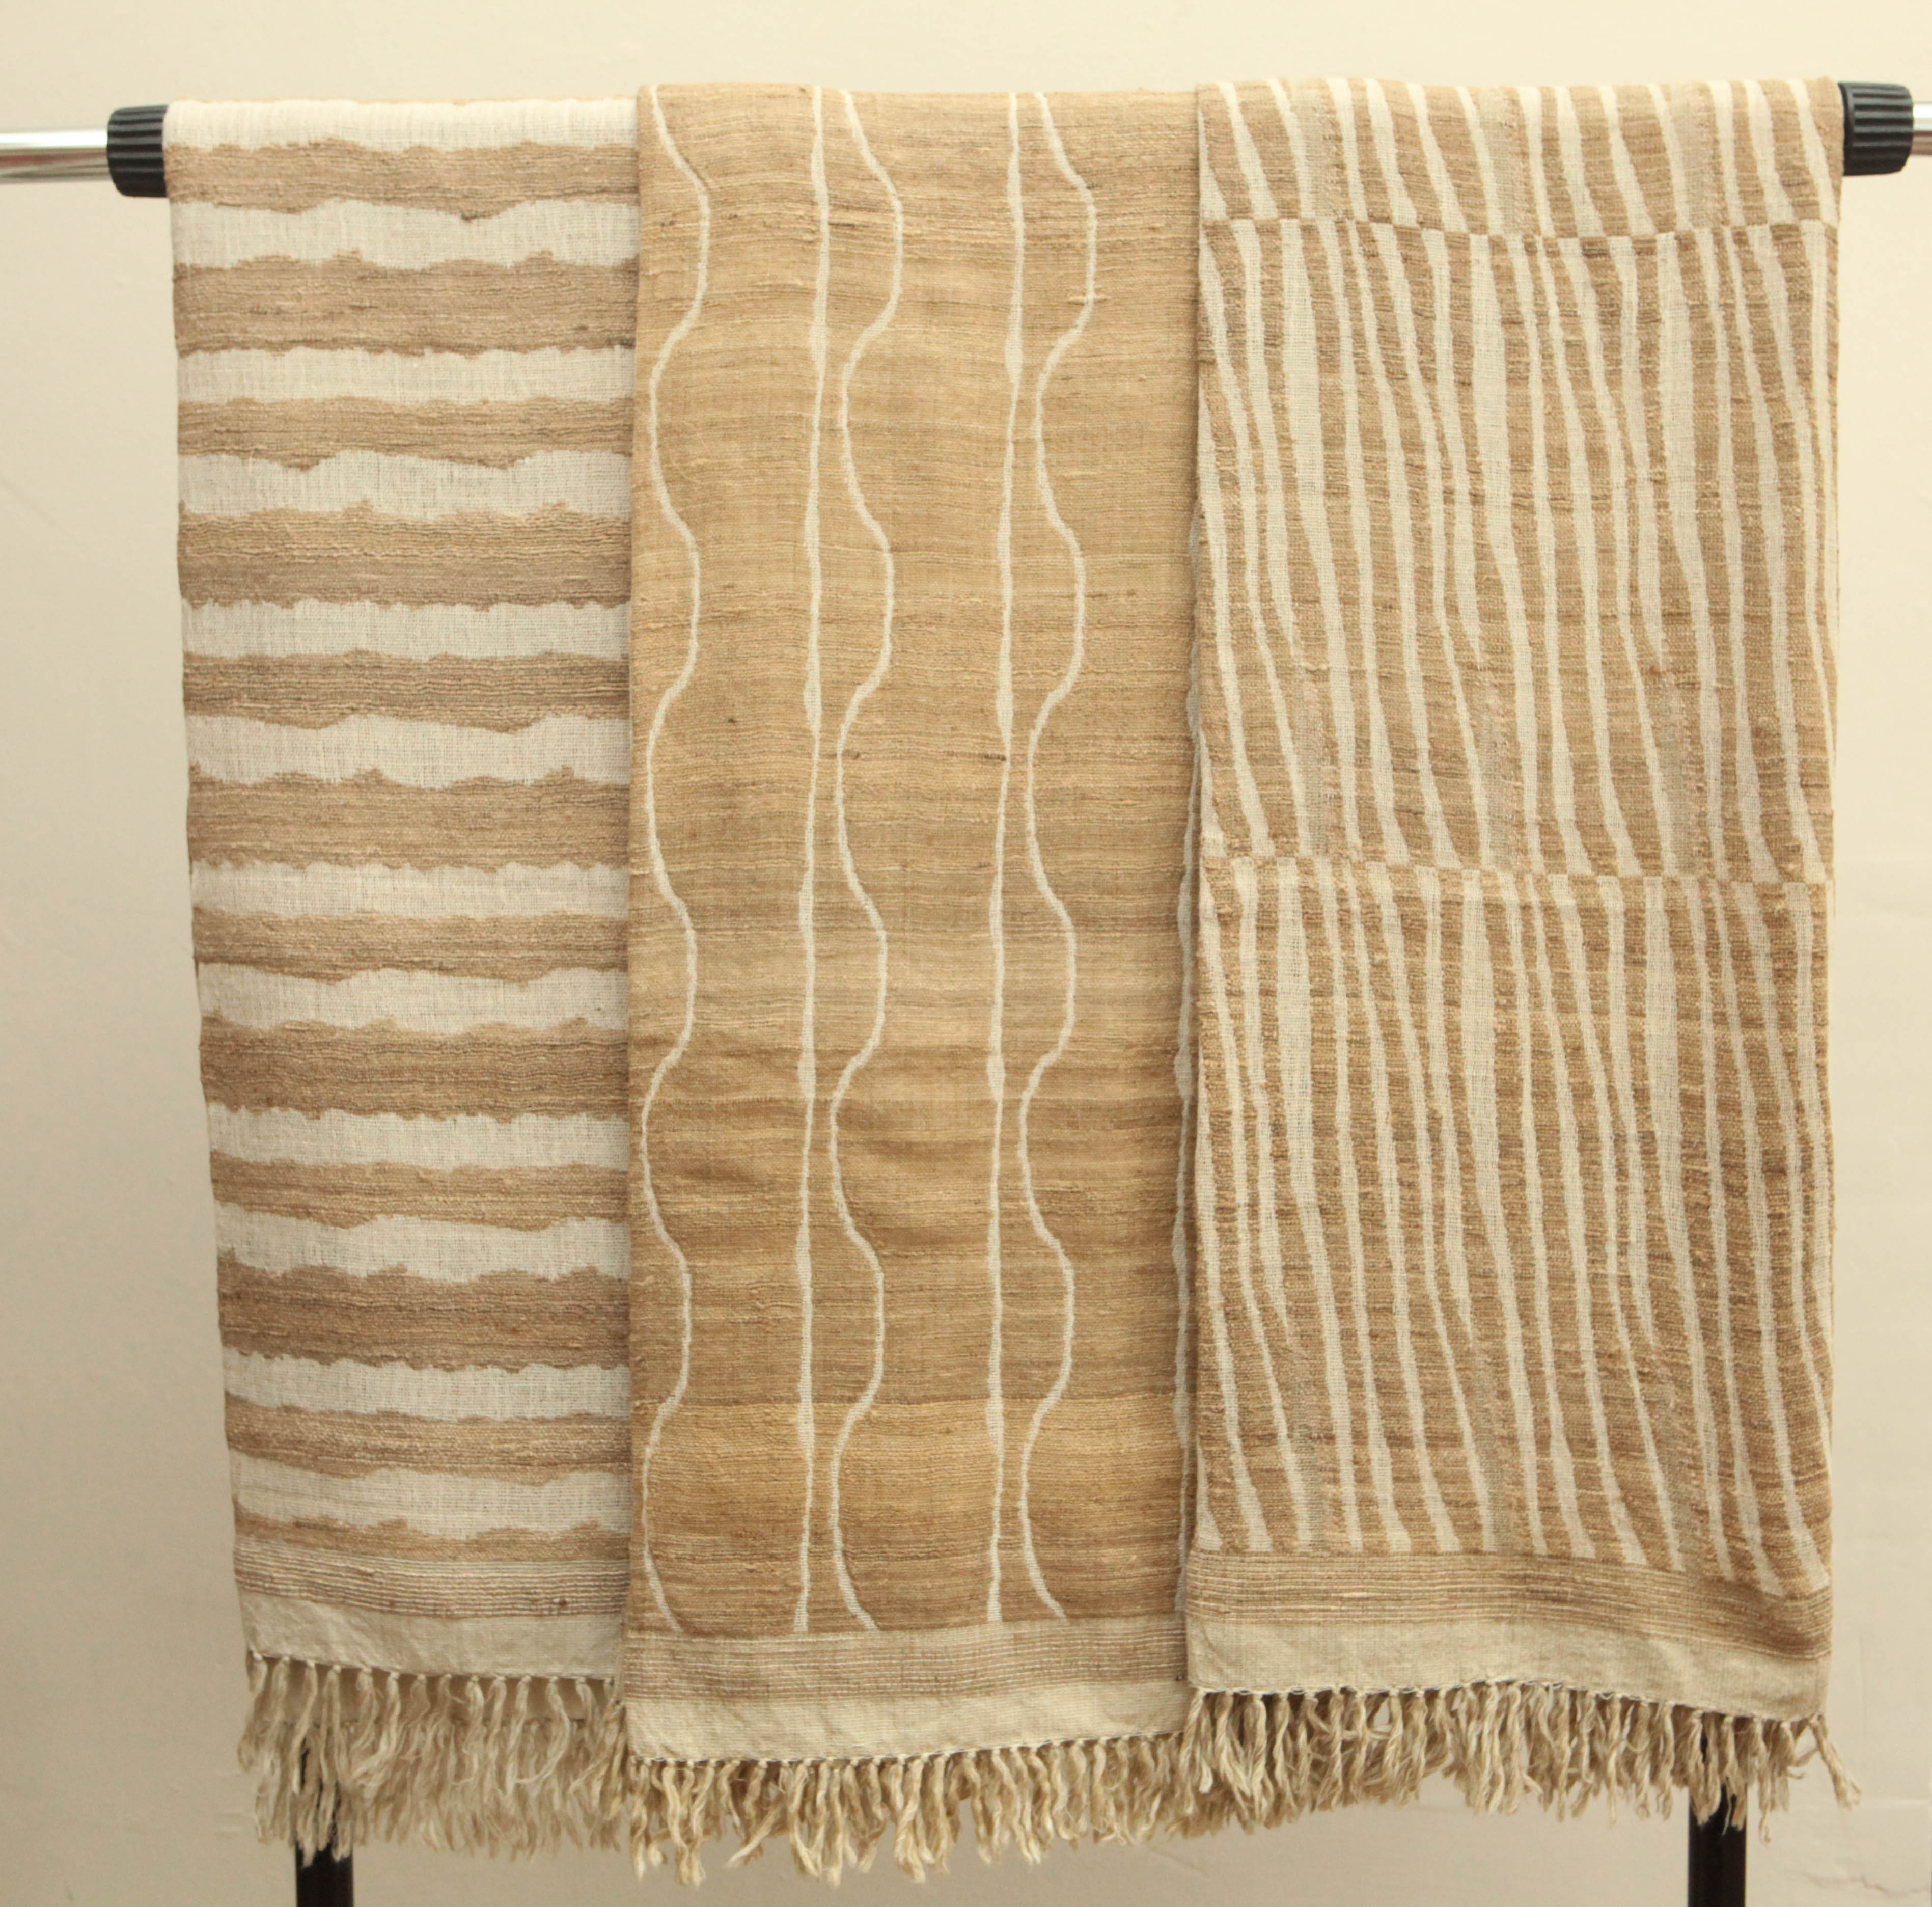 Indian Hand-Woven Throws.  Oatmeal and Ivory.  Wool and Raw Silk.  For Sale